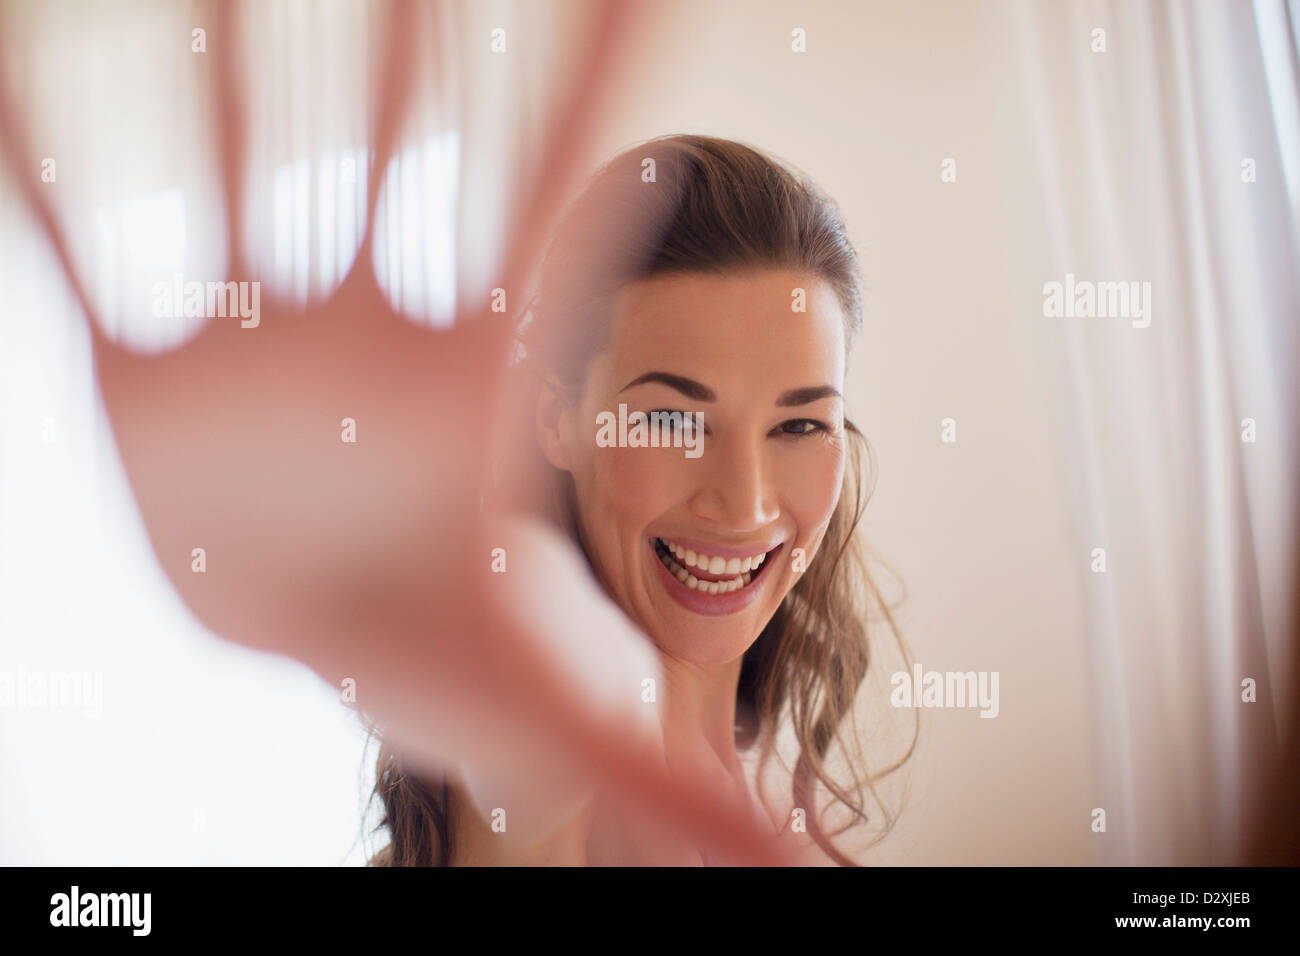 Portrait of smiling woman with hand outstretched Stock Photo